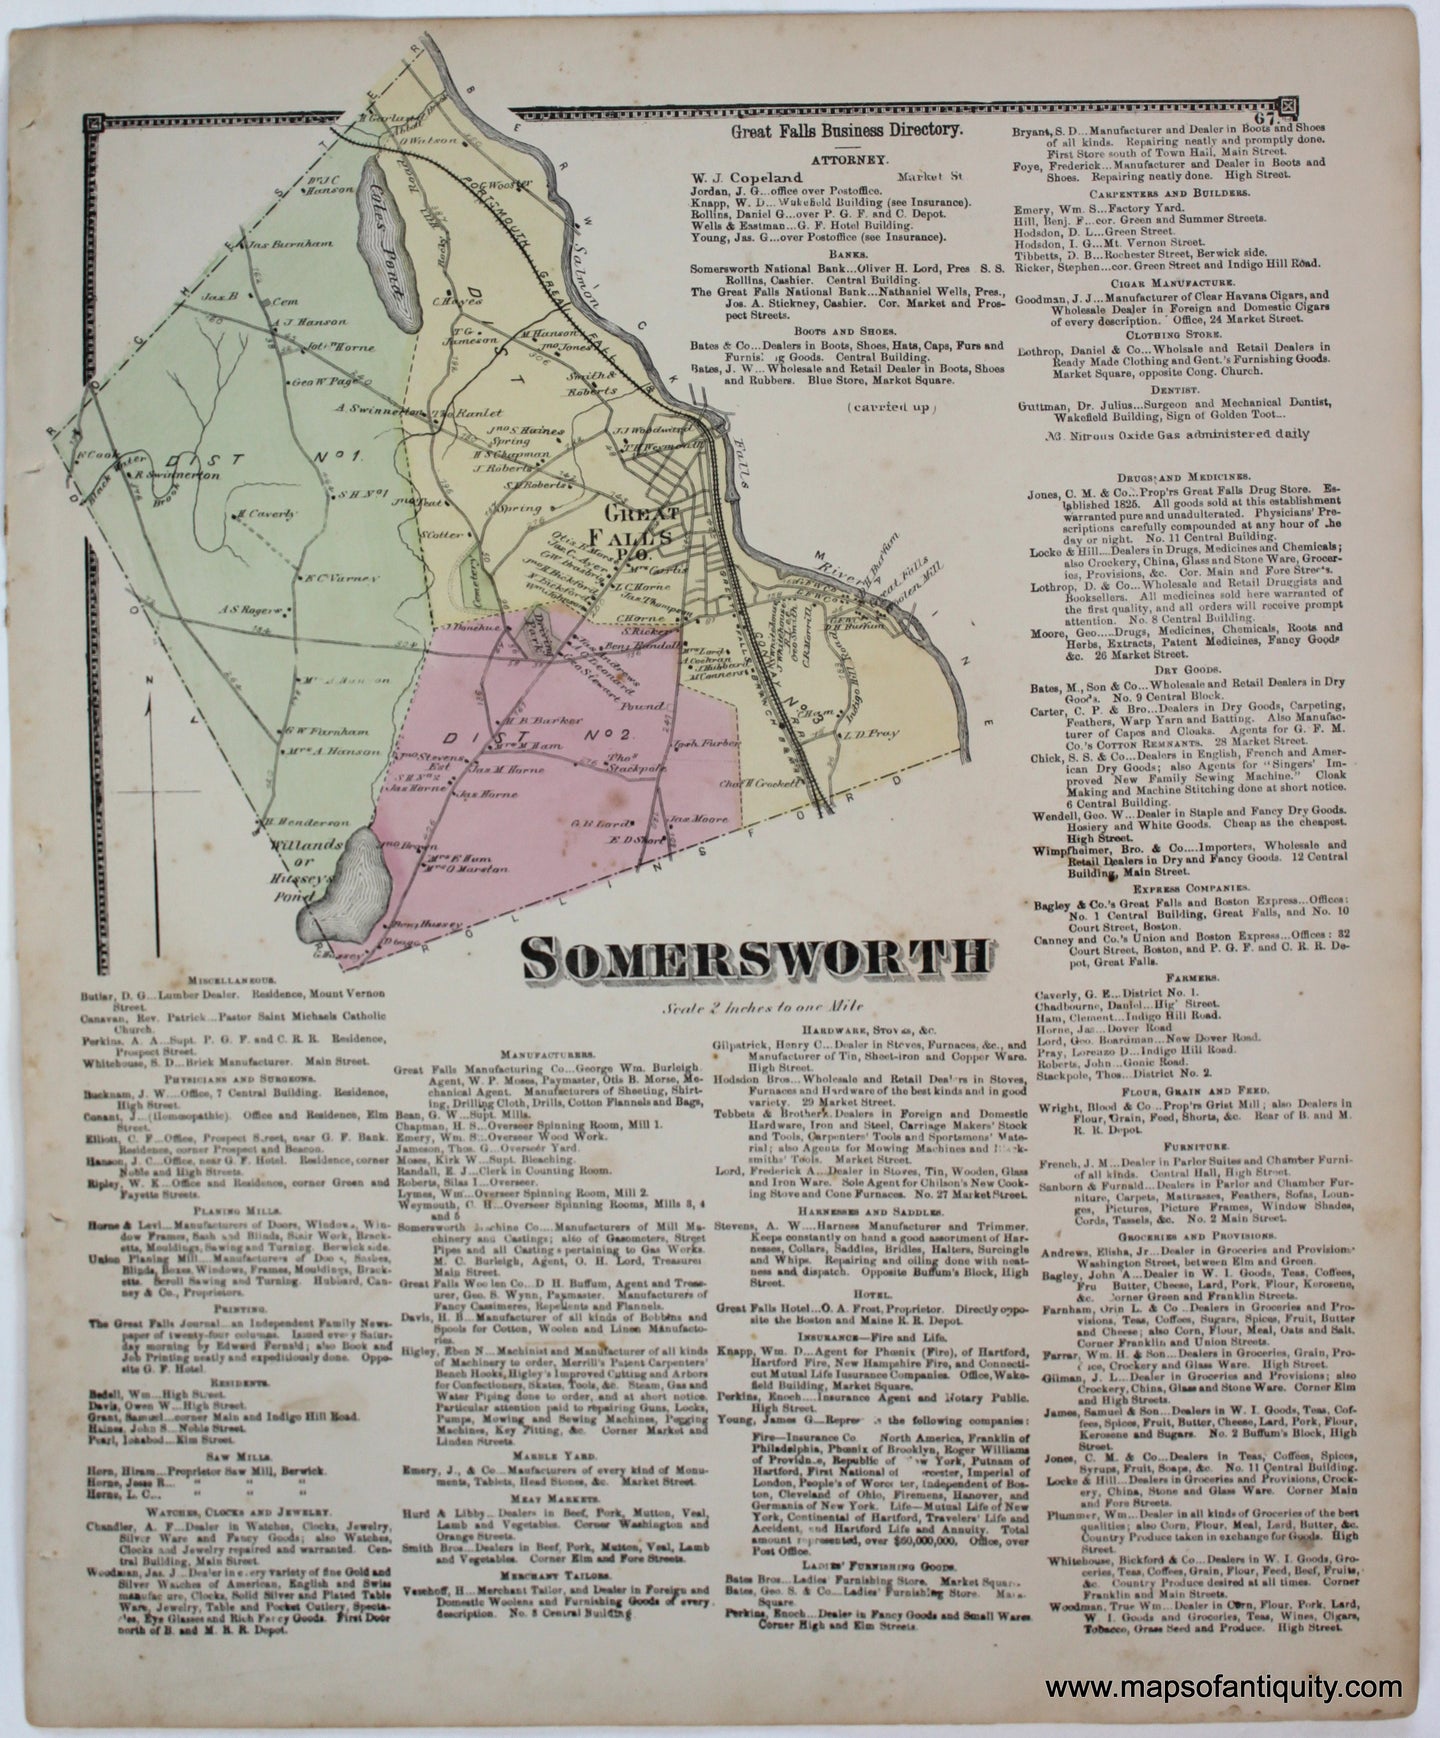 Antique-Map-Somersworth-Strafford-County-Town-Towns-New-Hampshire-NH-Sanford-Everts-1871-1870s-1800s-Mid-Late-19th-Century-Maps-of-Antiquity